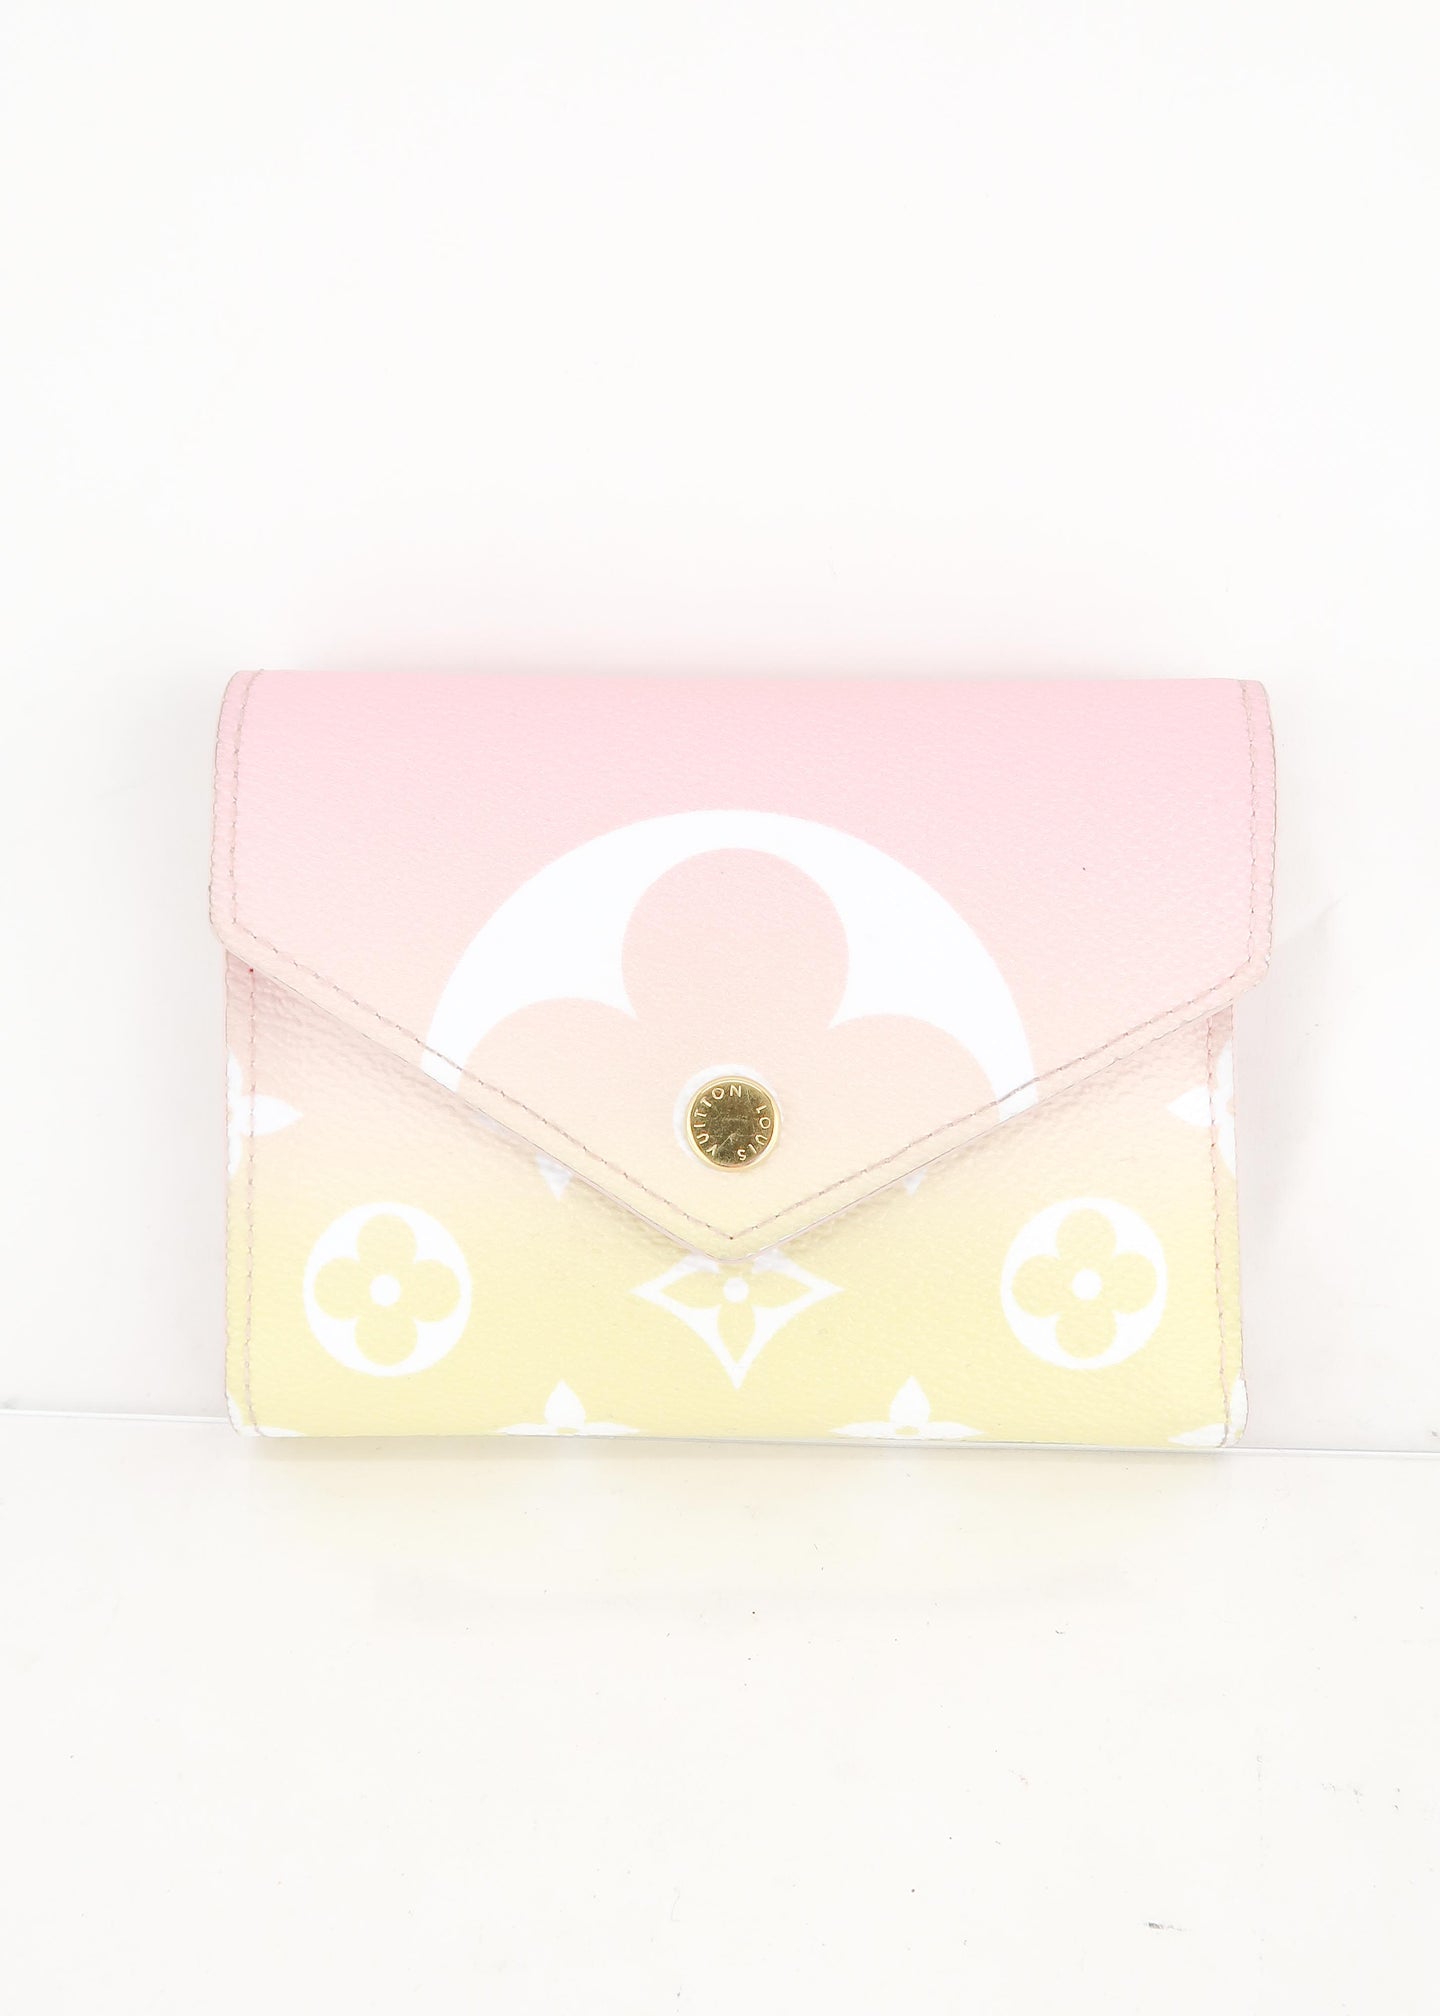 pink and green louis vuittons wallet